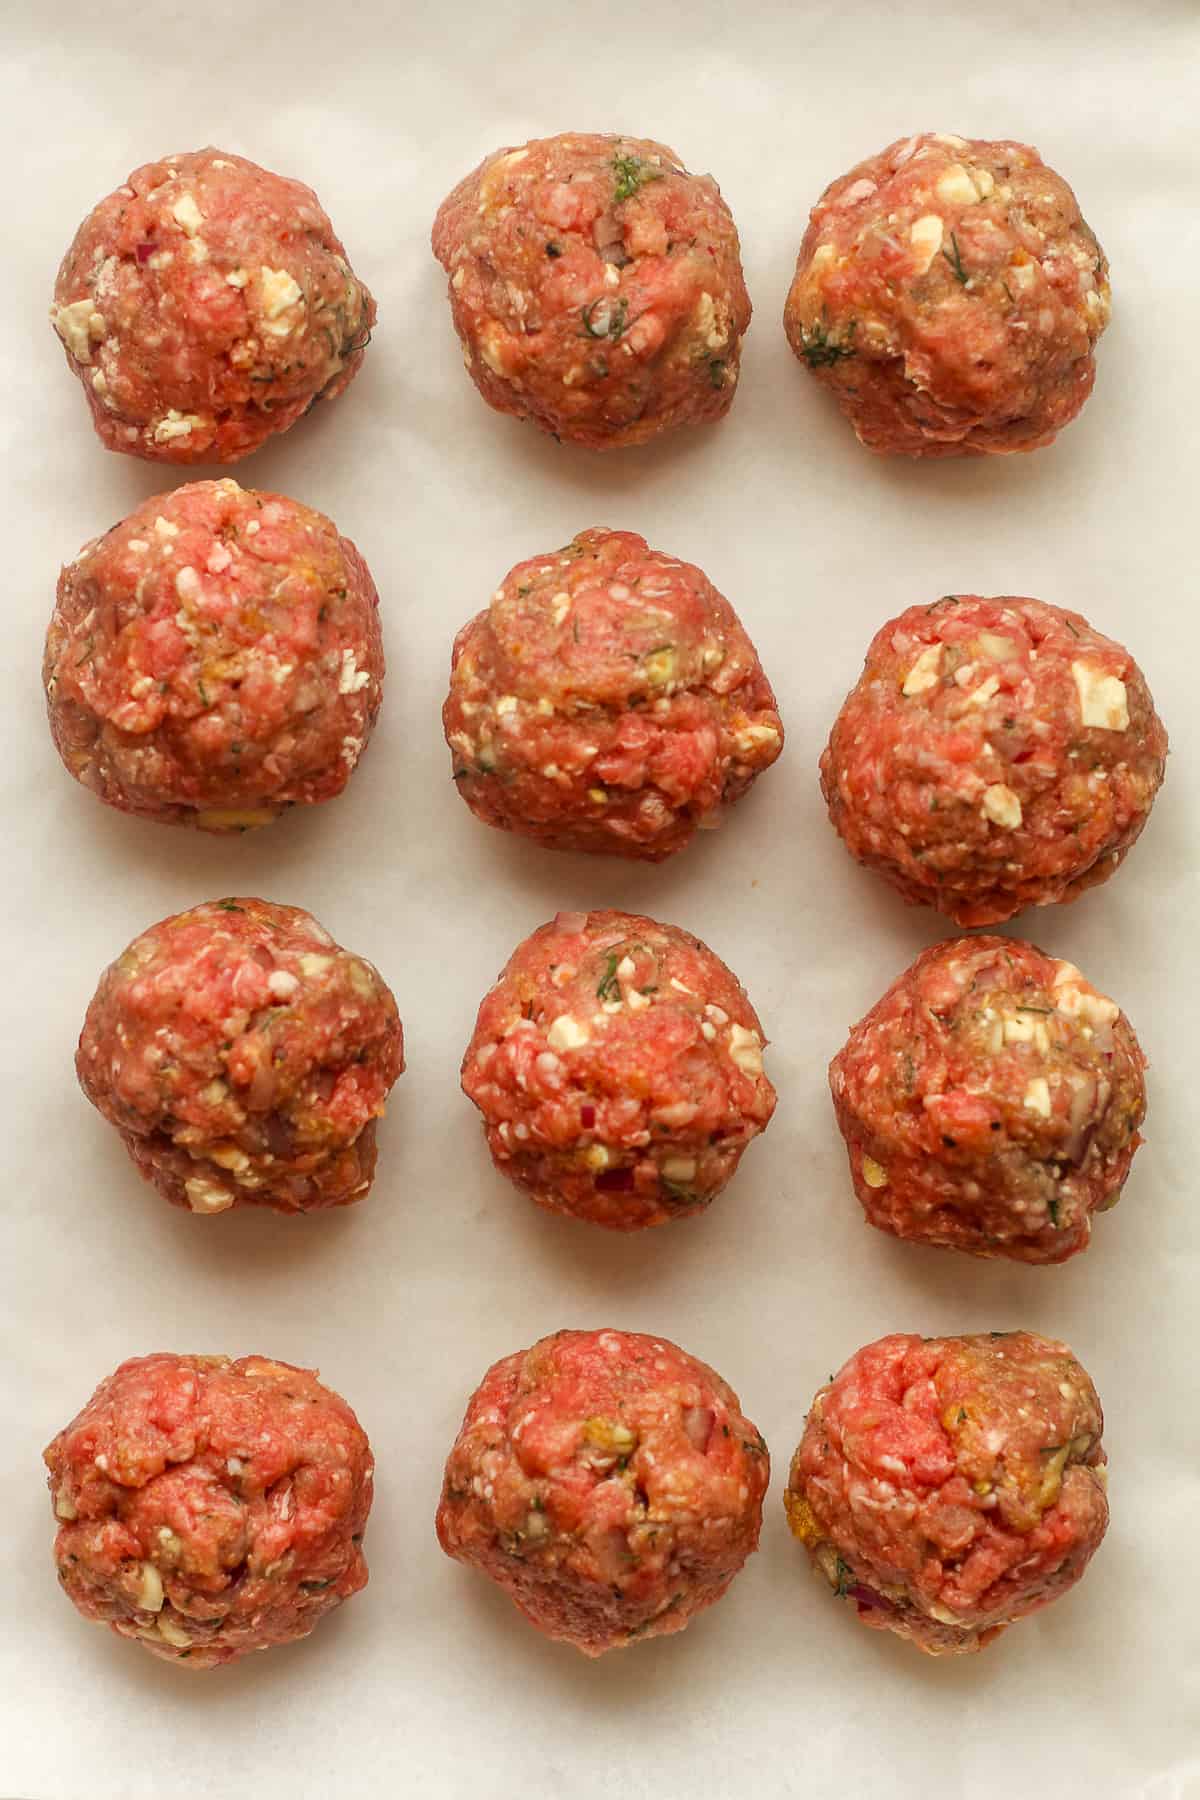 12 raw lamb meatballs on parchment paper.